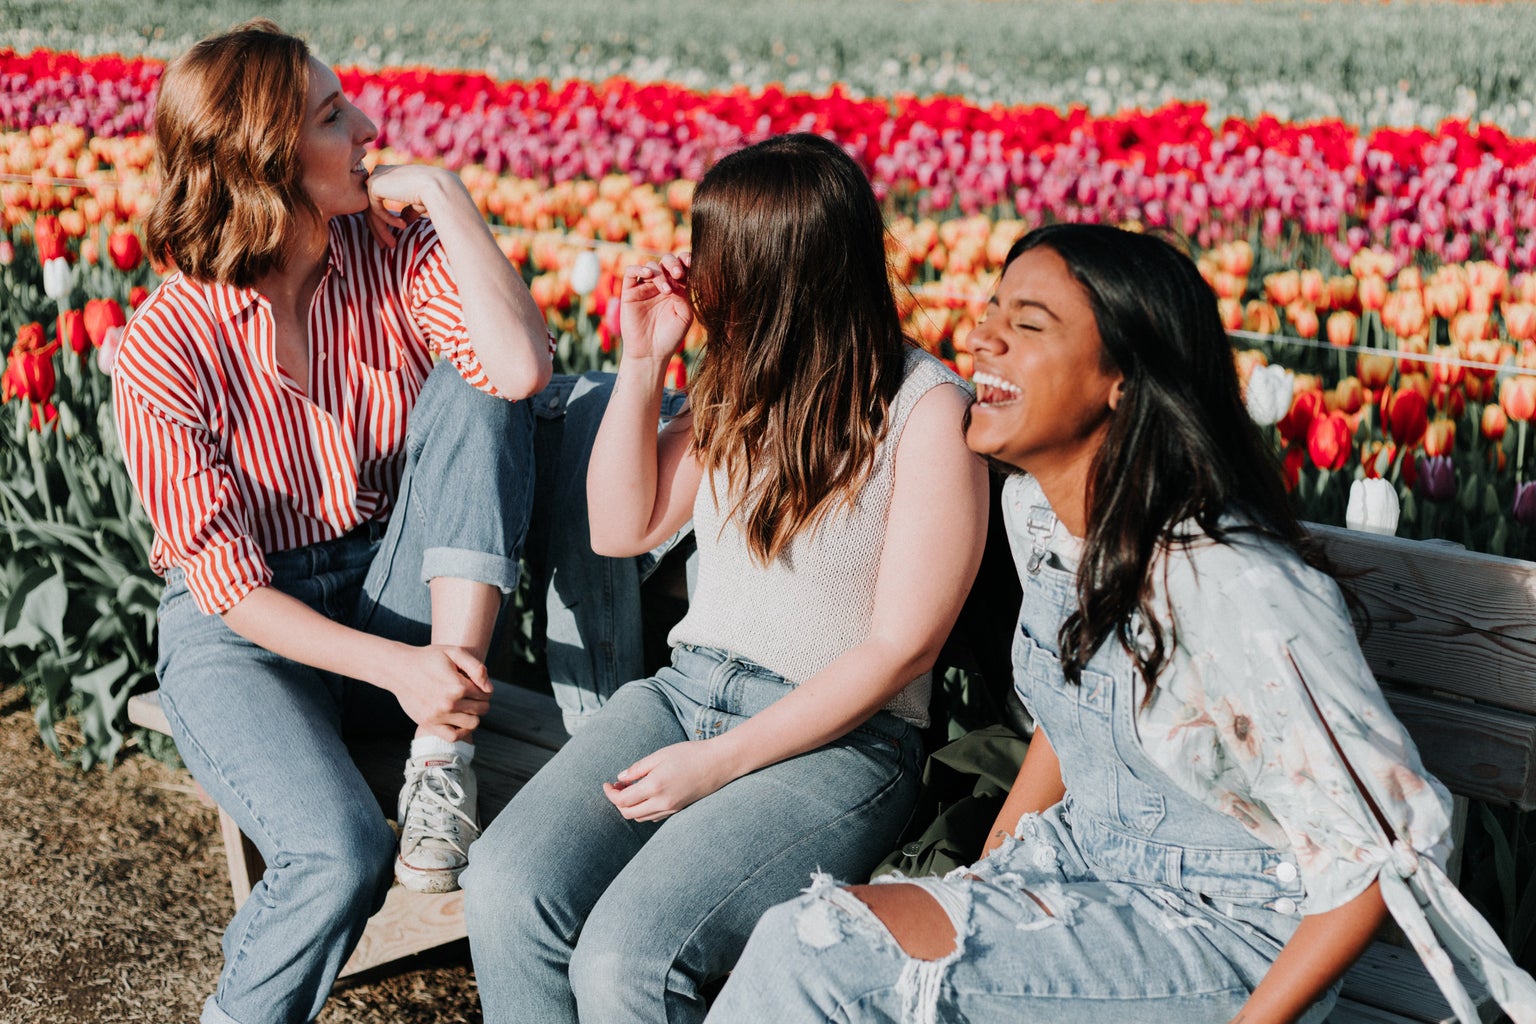 Three women talking and laughing on the wooden bench next to the tulip flower field